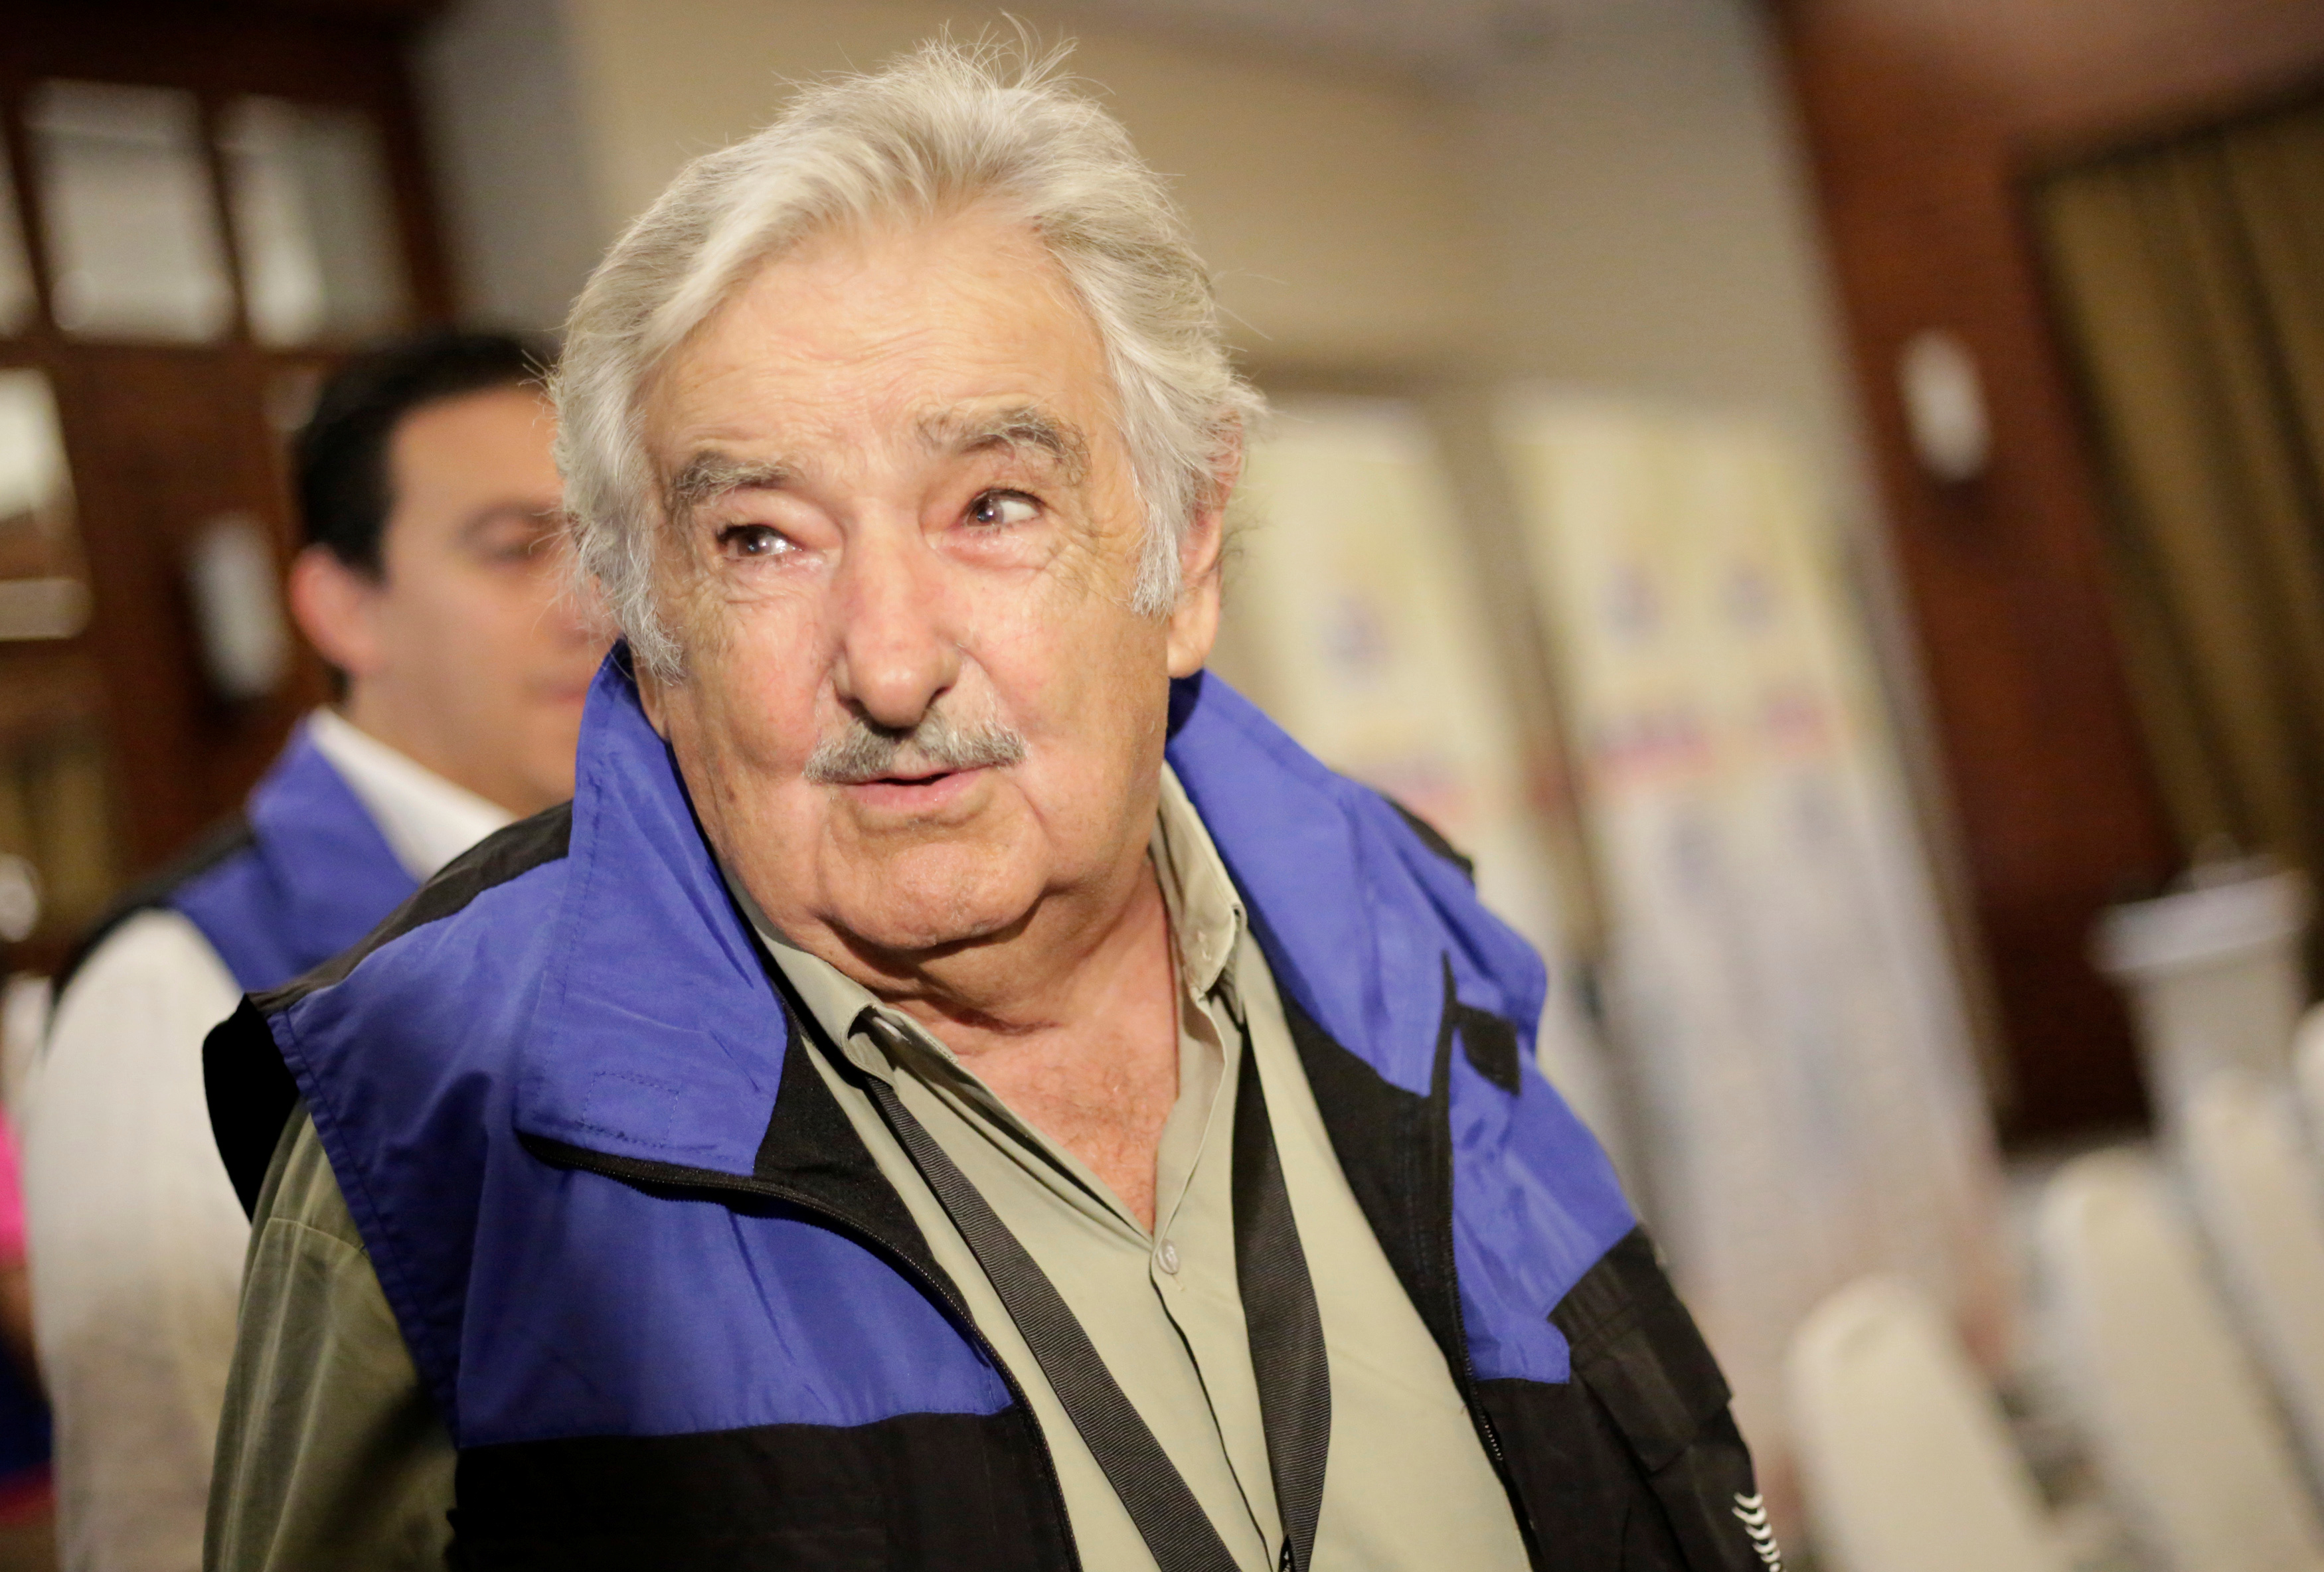 “That lady lost her motorcycle,” Pepe Mujica criticized the words of Delcy Rodriguez, the Uruguayan president